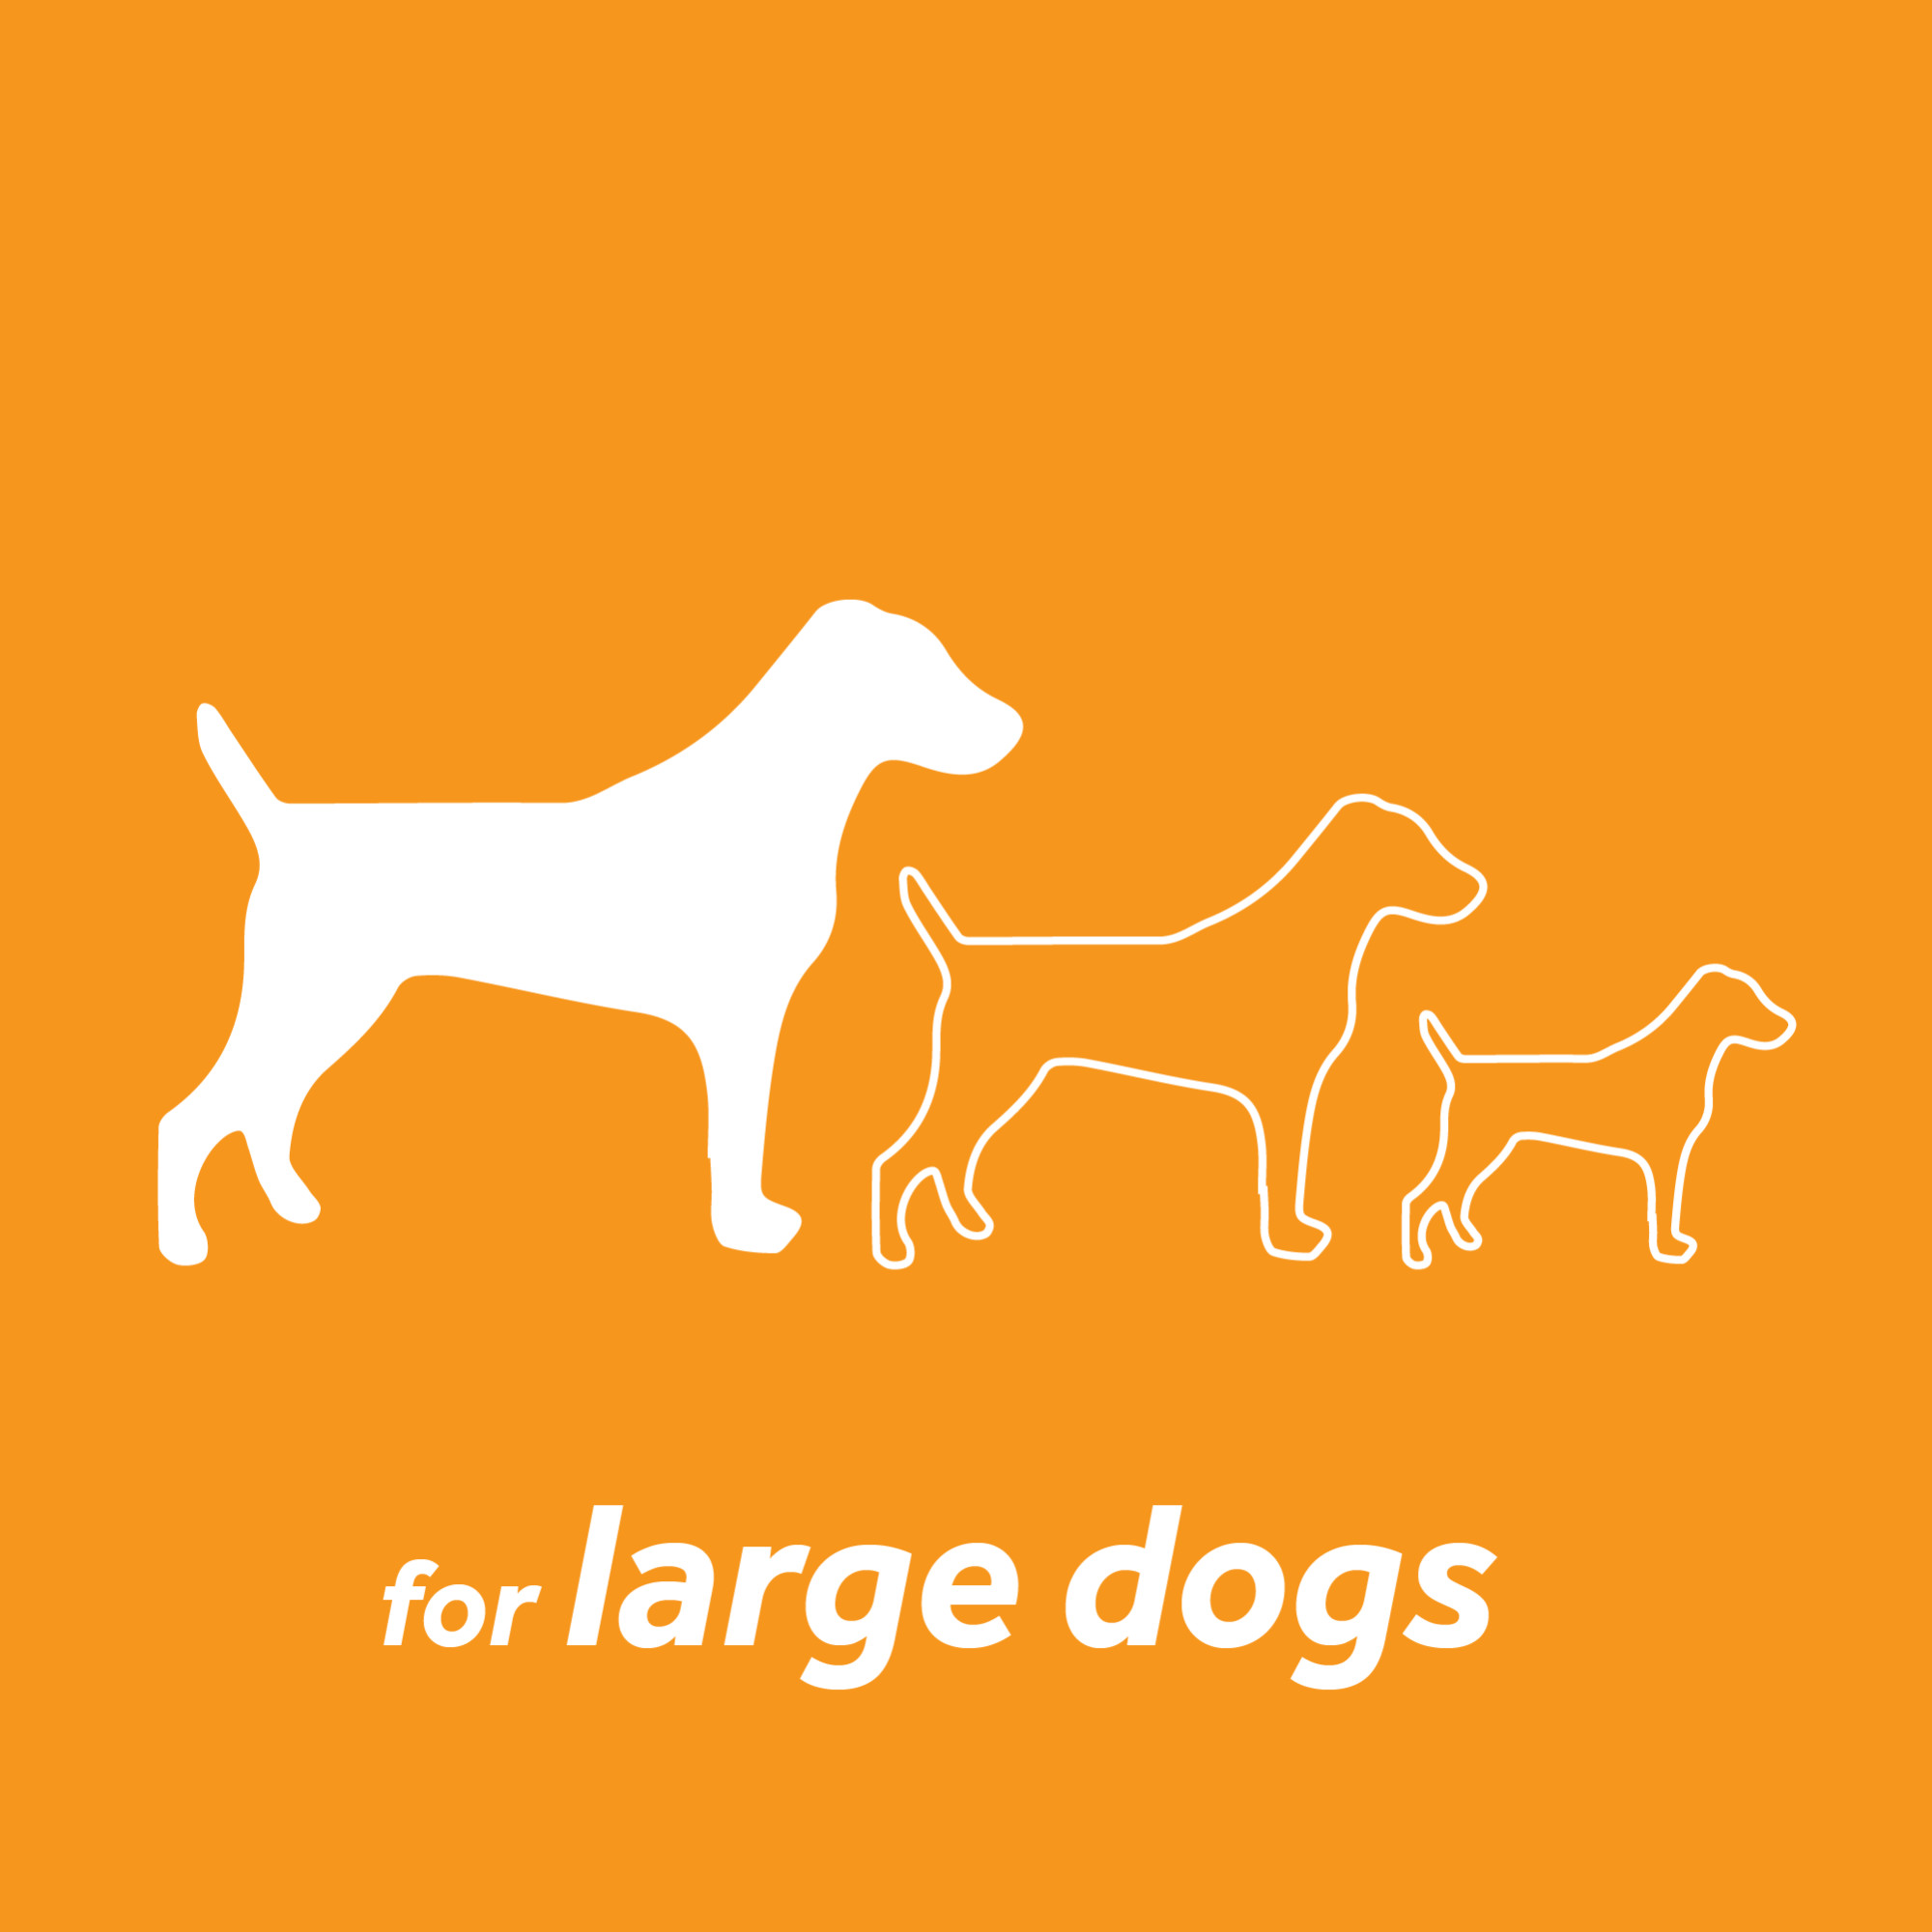 Total Care Kit for Large Dogs